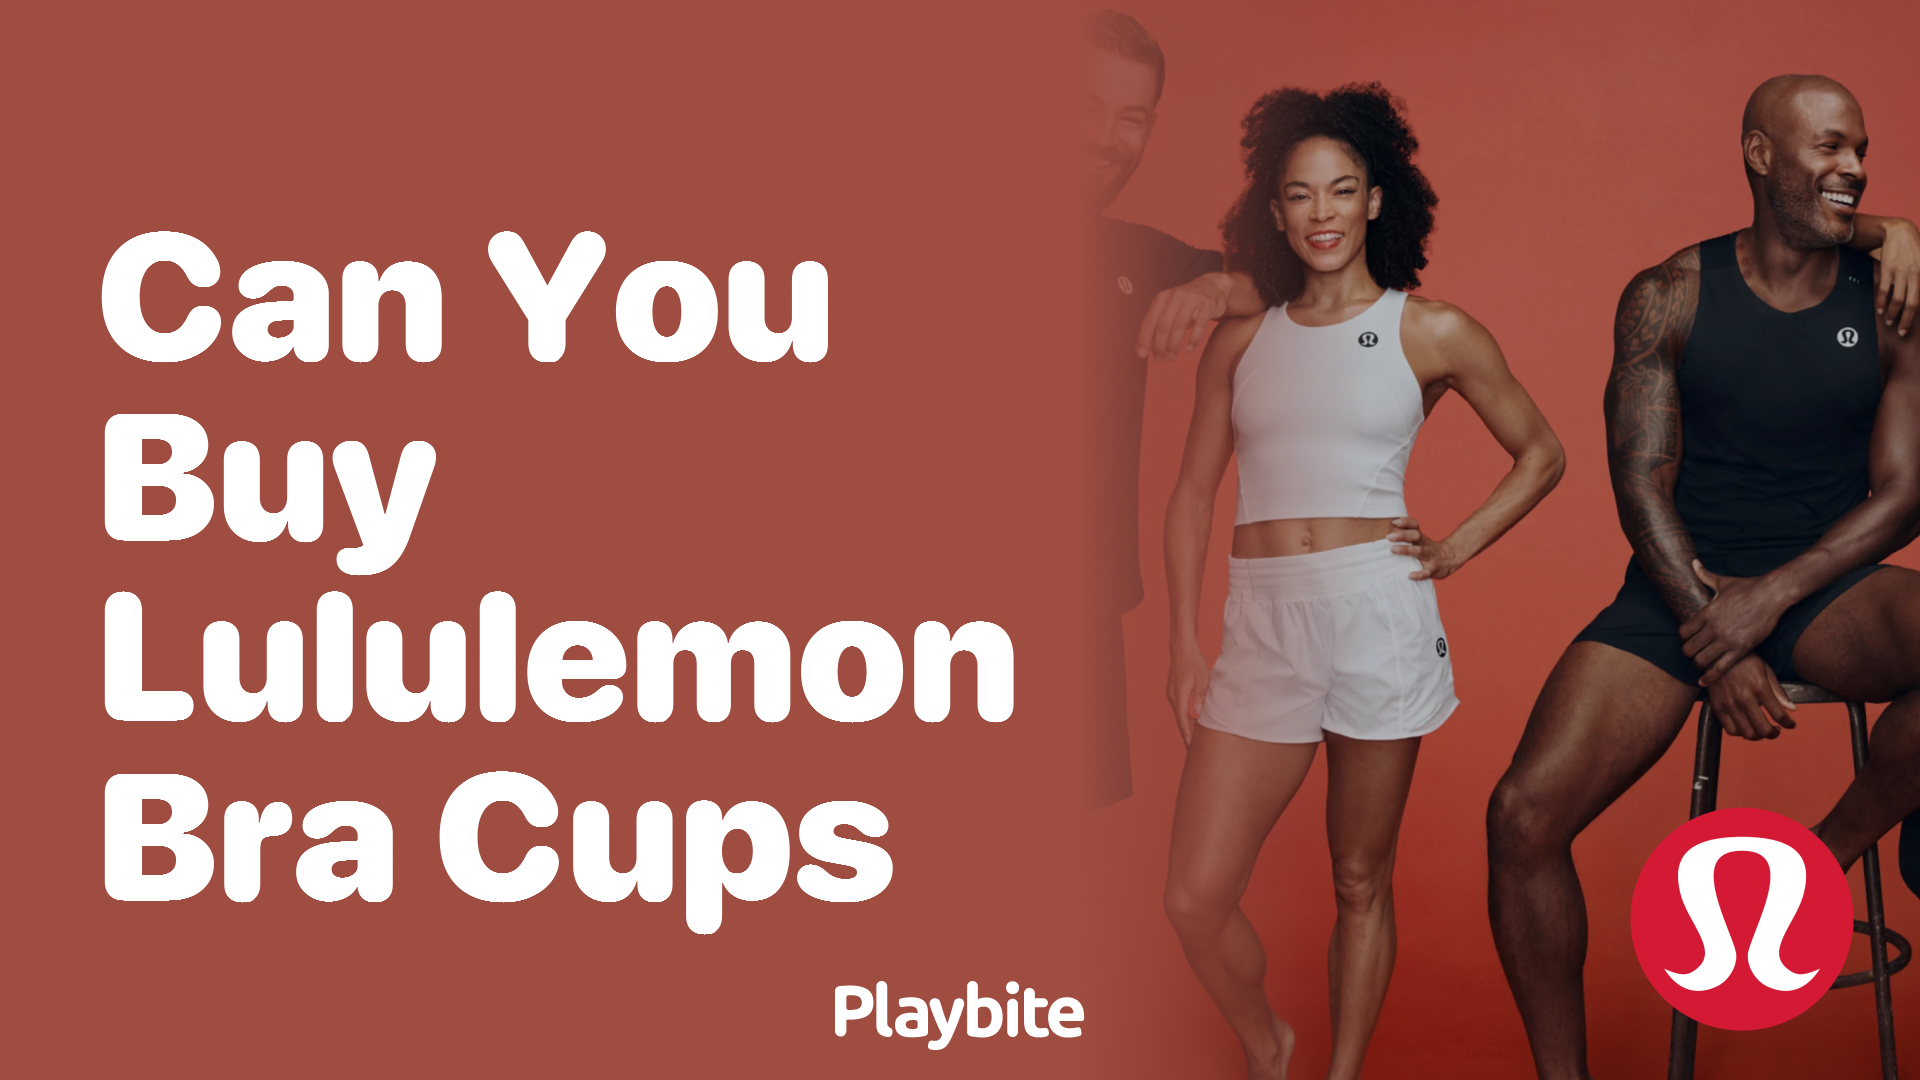 Can You Buy Lululemon Bra Cups? - Playbite